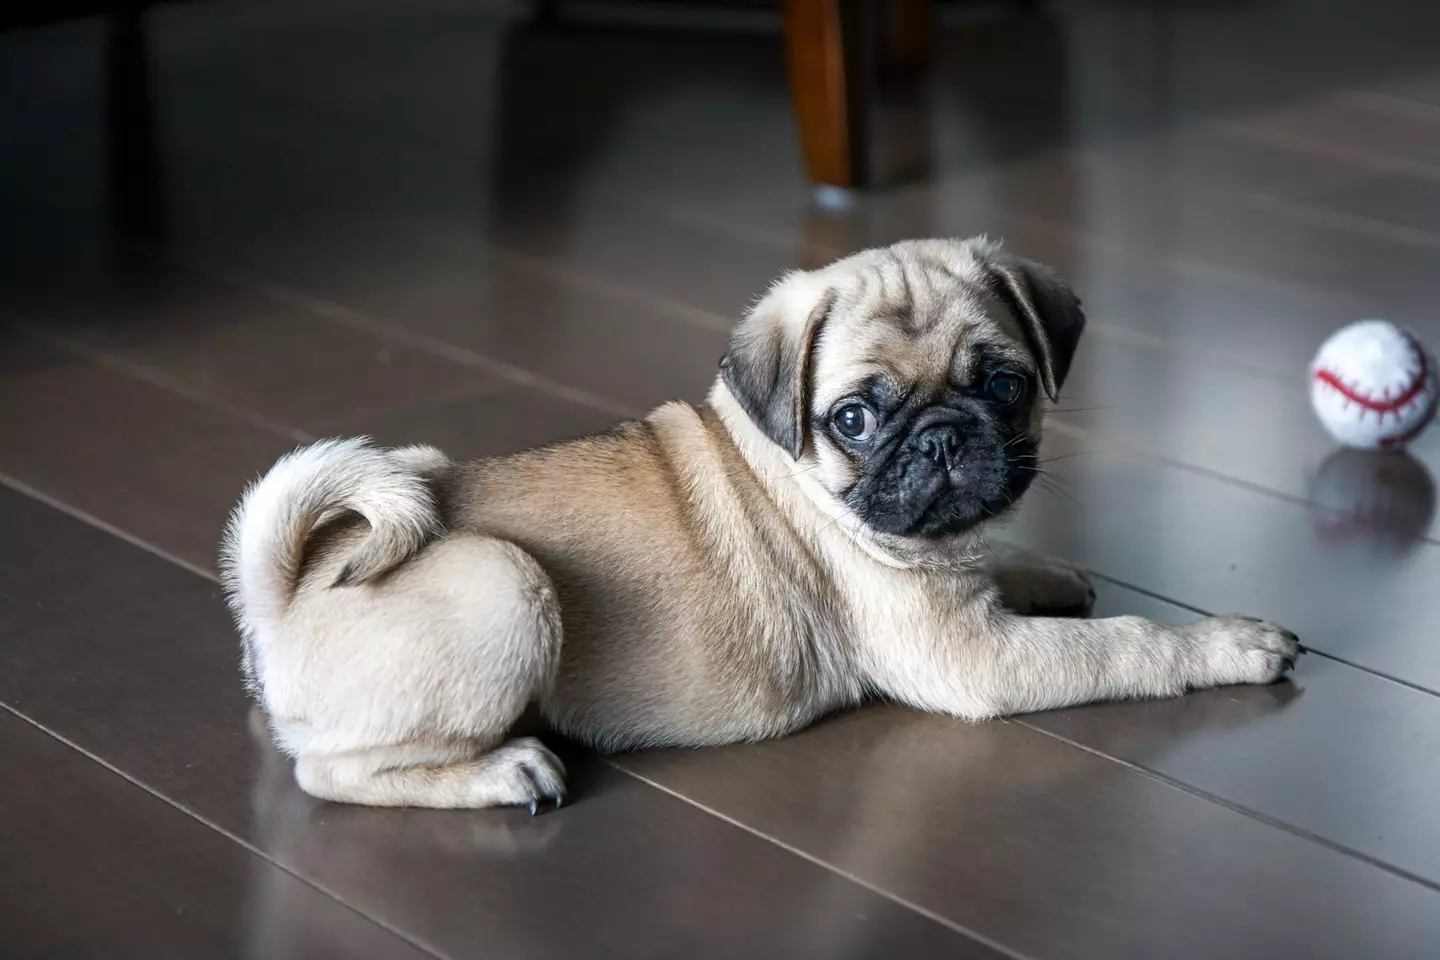 Pugs suffer a long list of health issues.